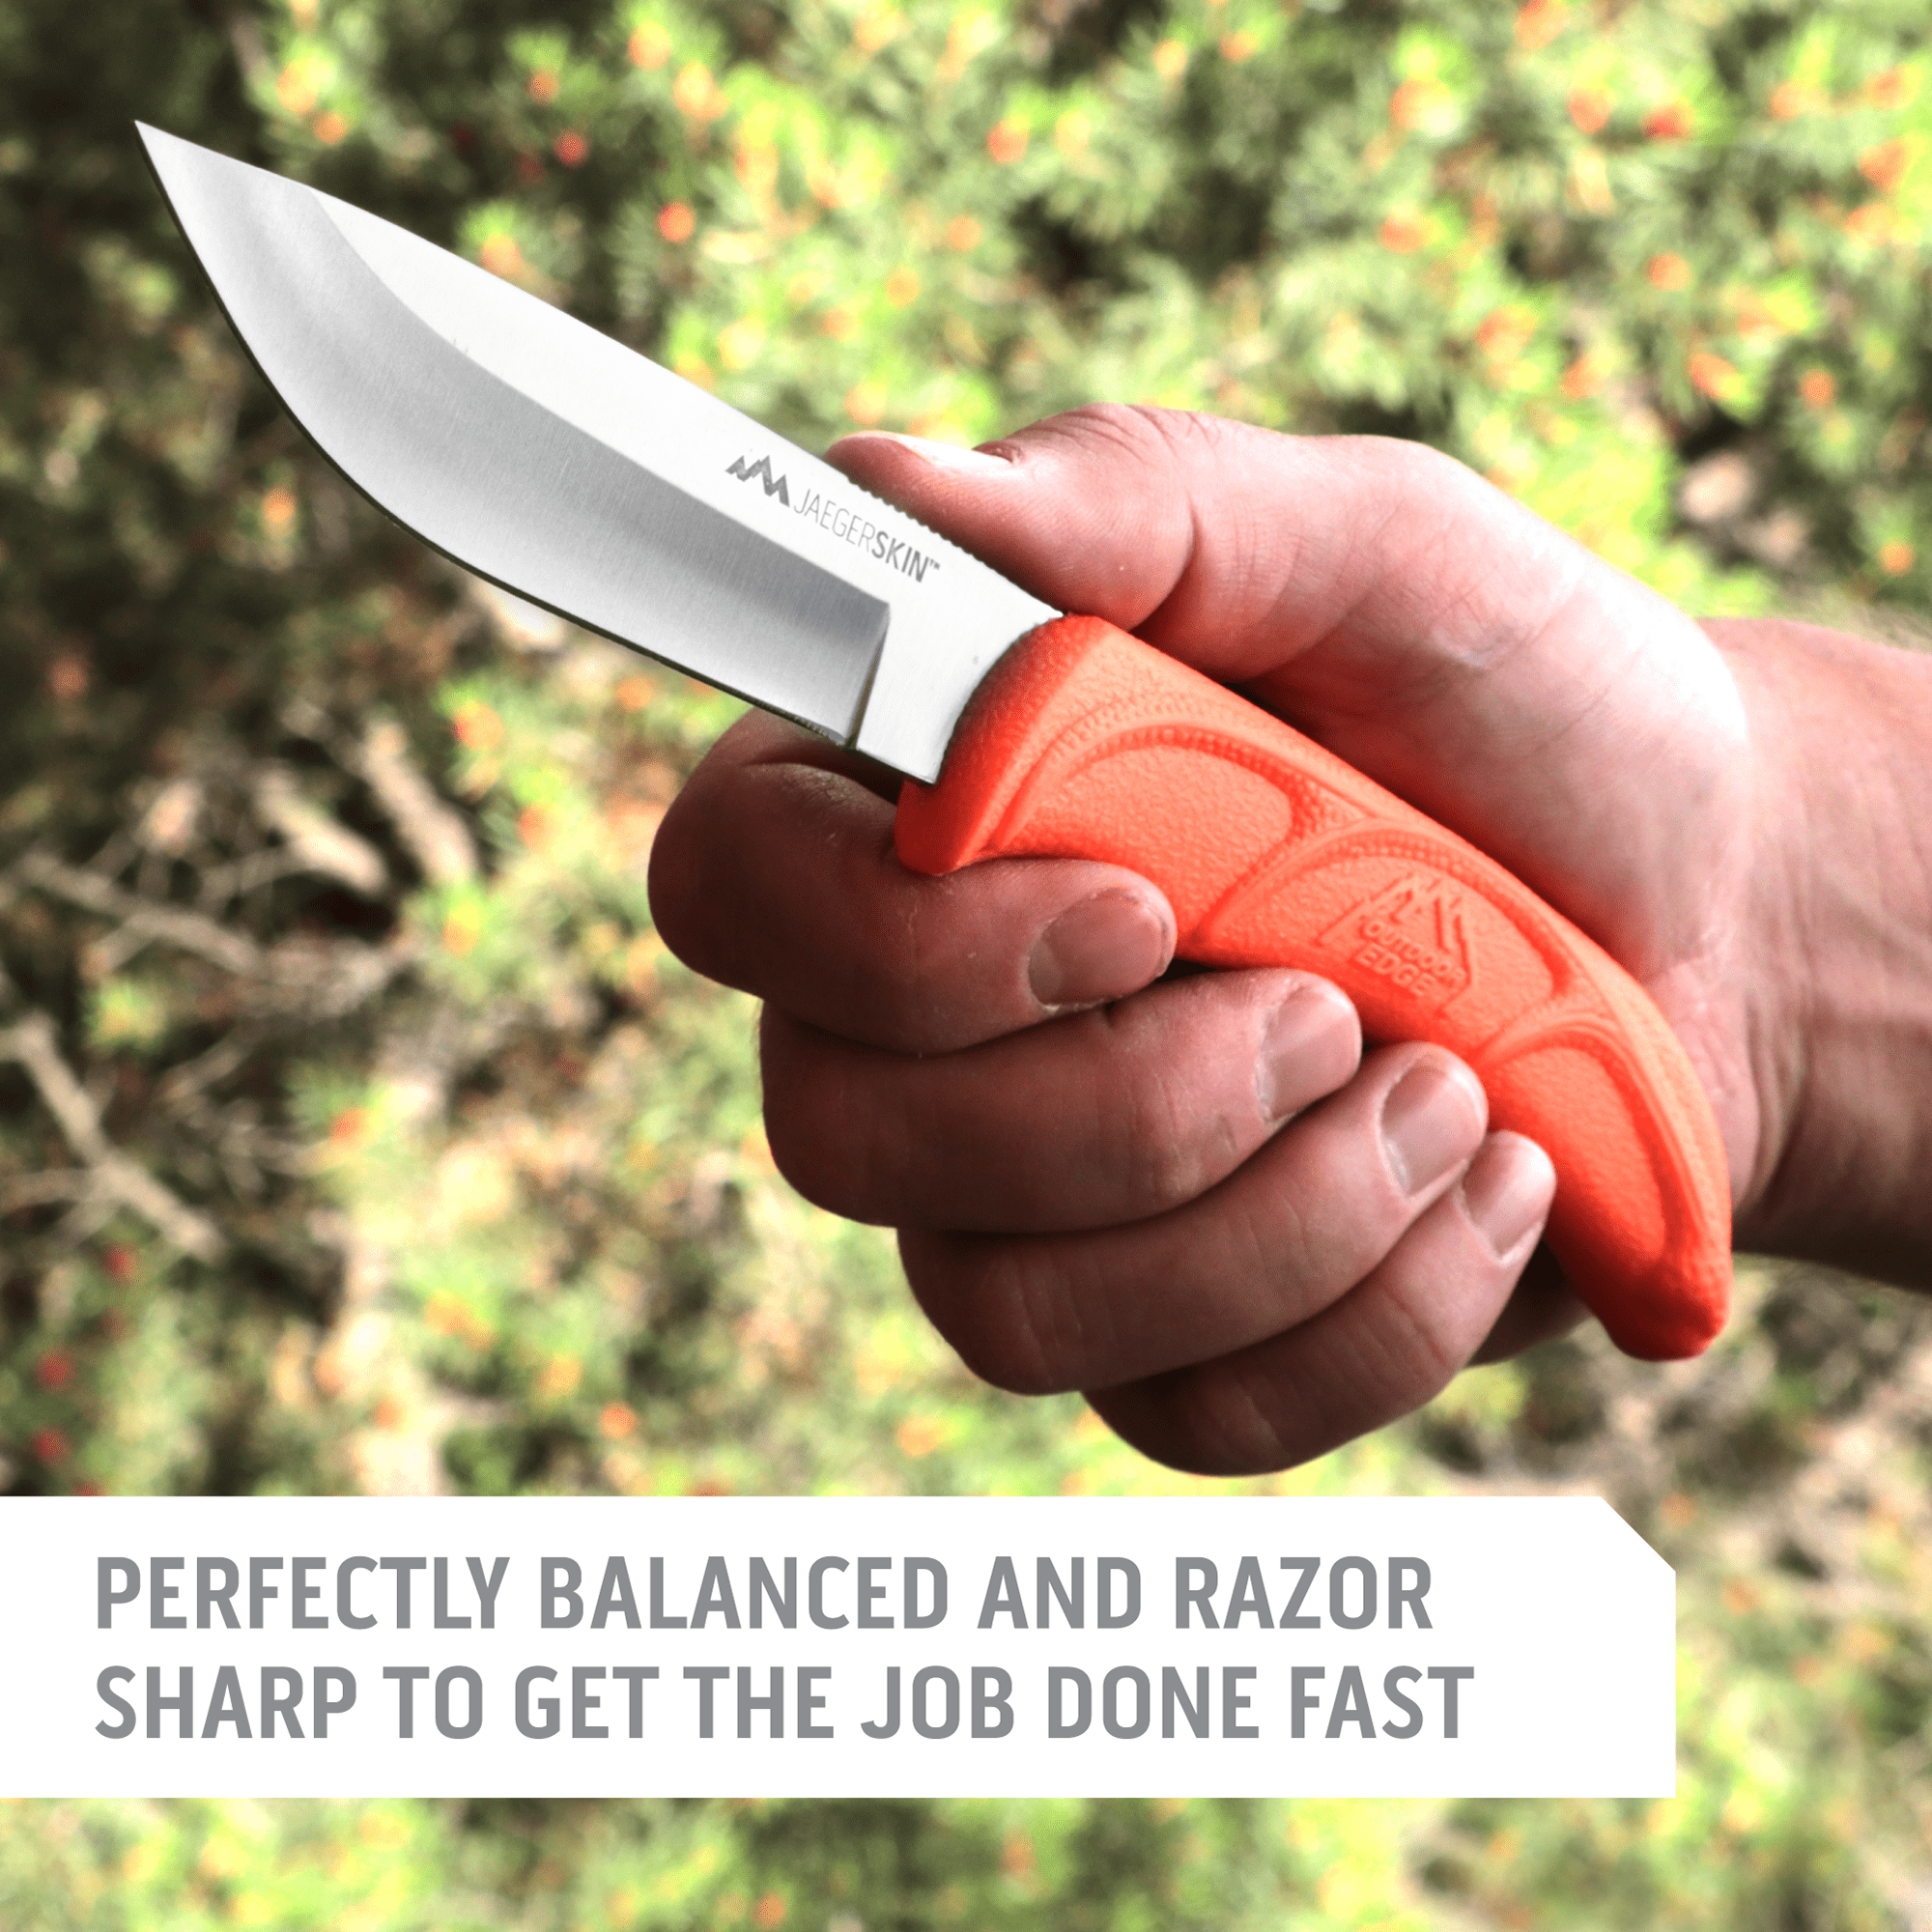 Outdoor Edge JaegerPair Hunting and Field dressing knife product photo showing gutting knife in the field with text 